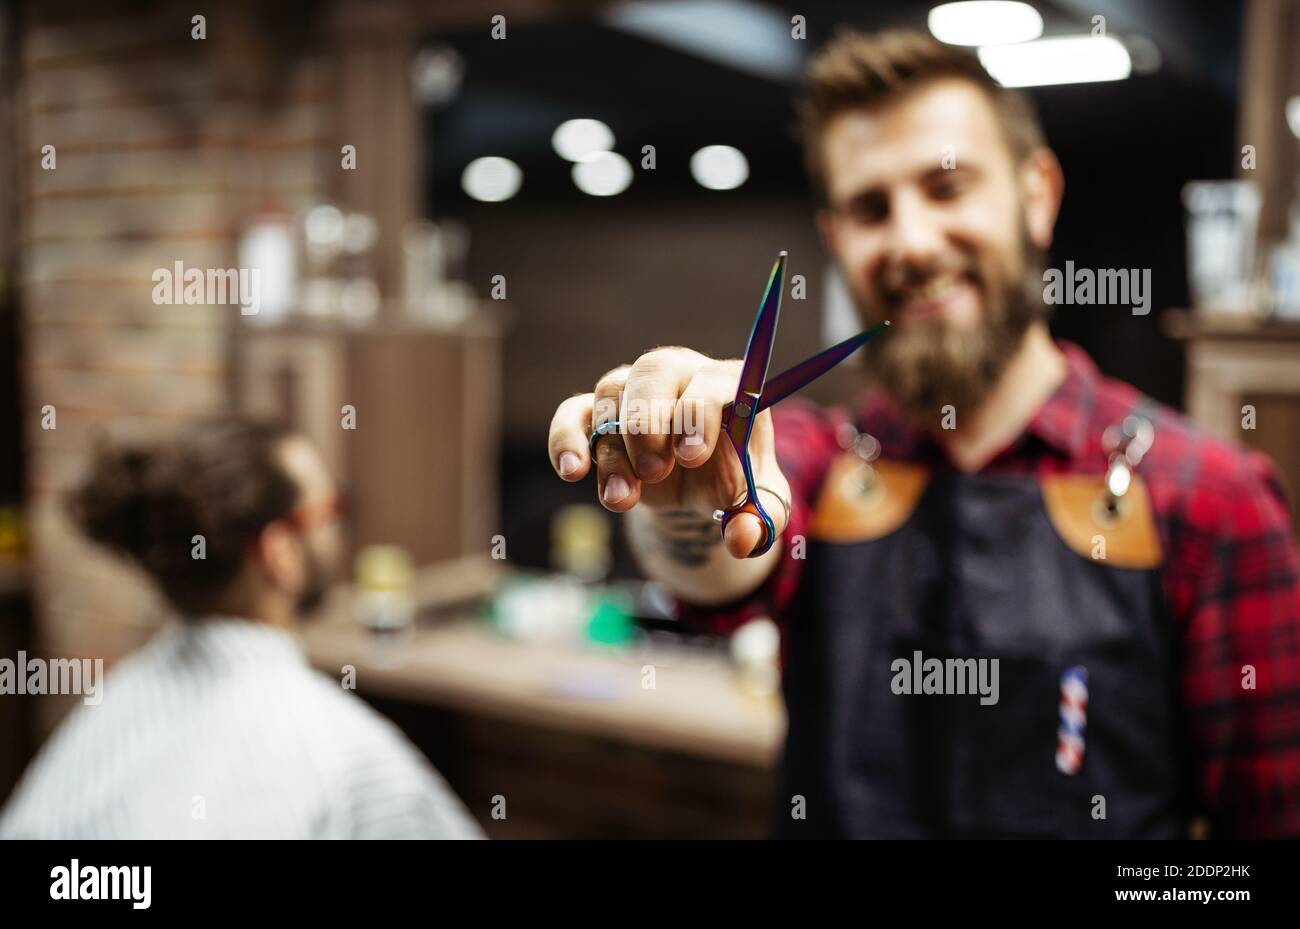 Portrait of happy young barber with client at barbershop and smiling. Stock Photo